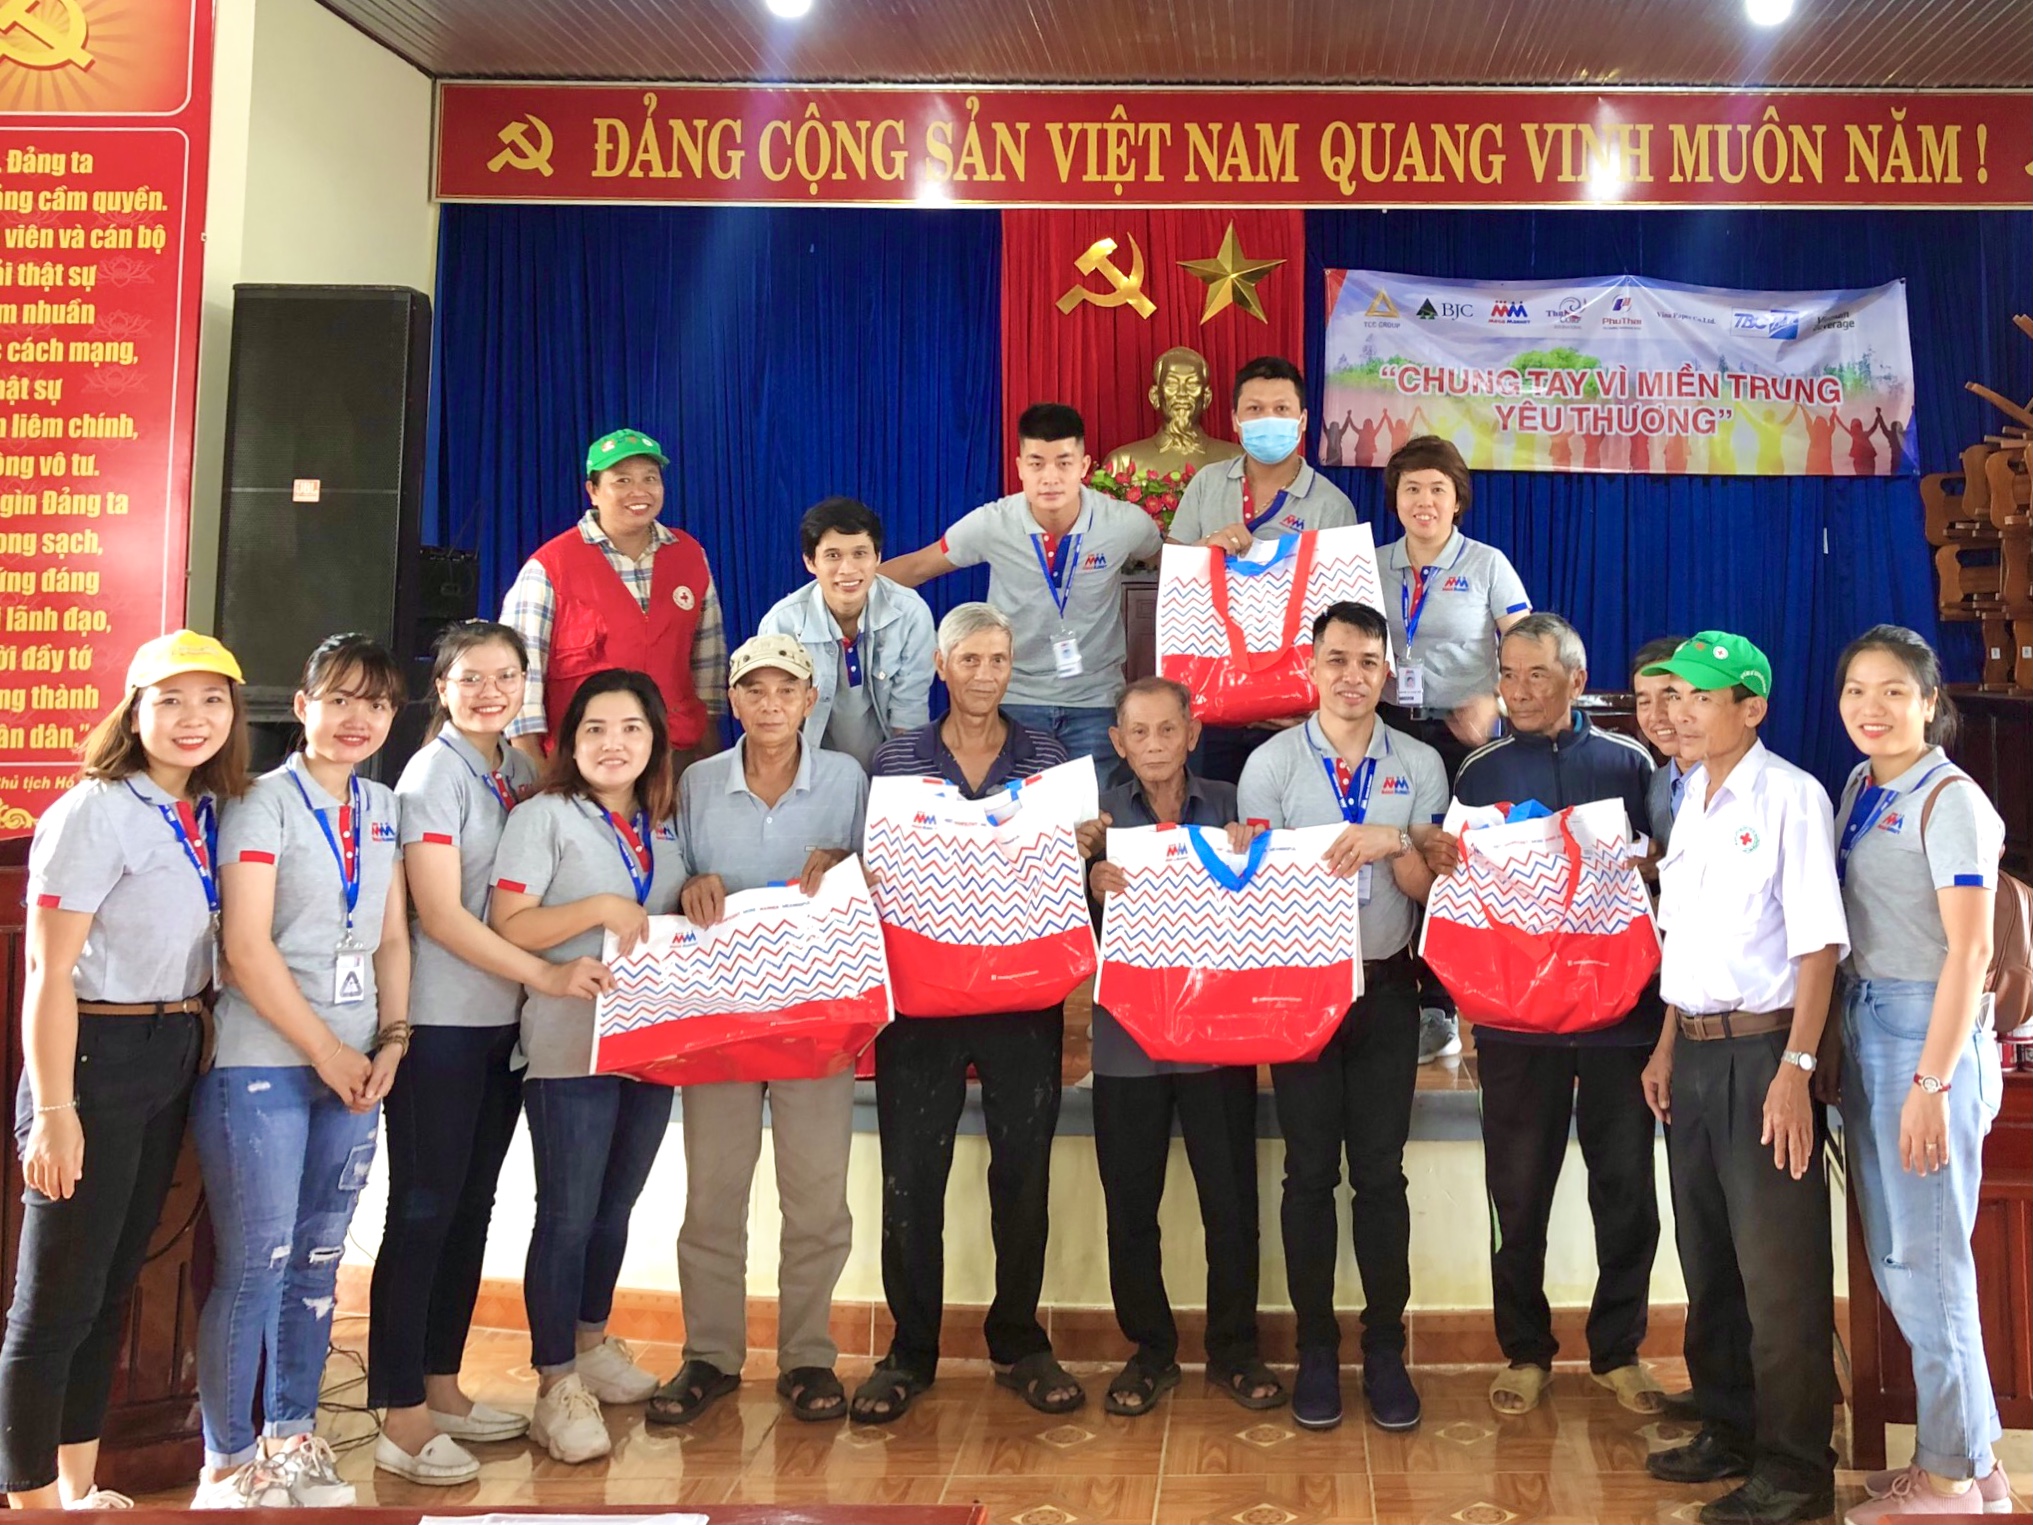 Phu Thai Group joins hands for the love of the Central region